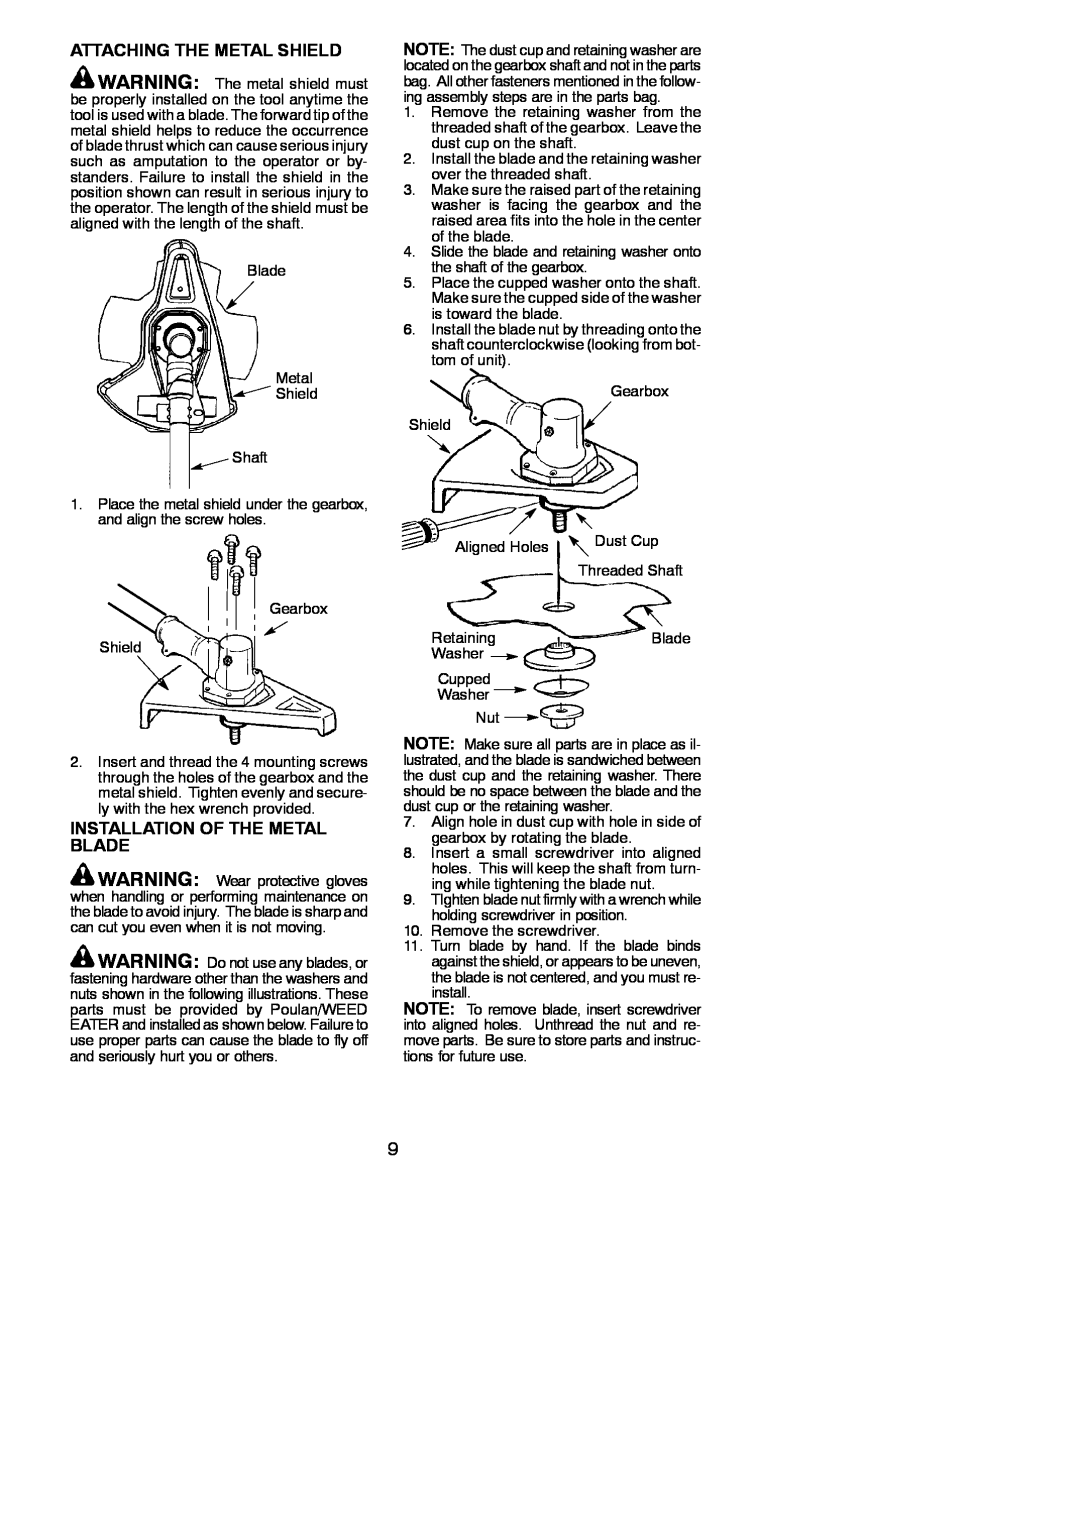 Poulan 545186843 instruction manual Attaching The Metal Shield, Installation Of The Metal Blade 